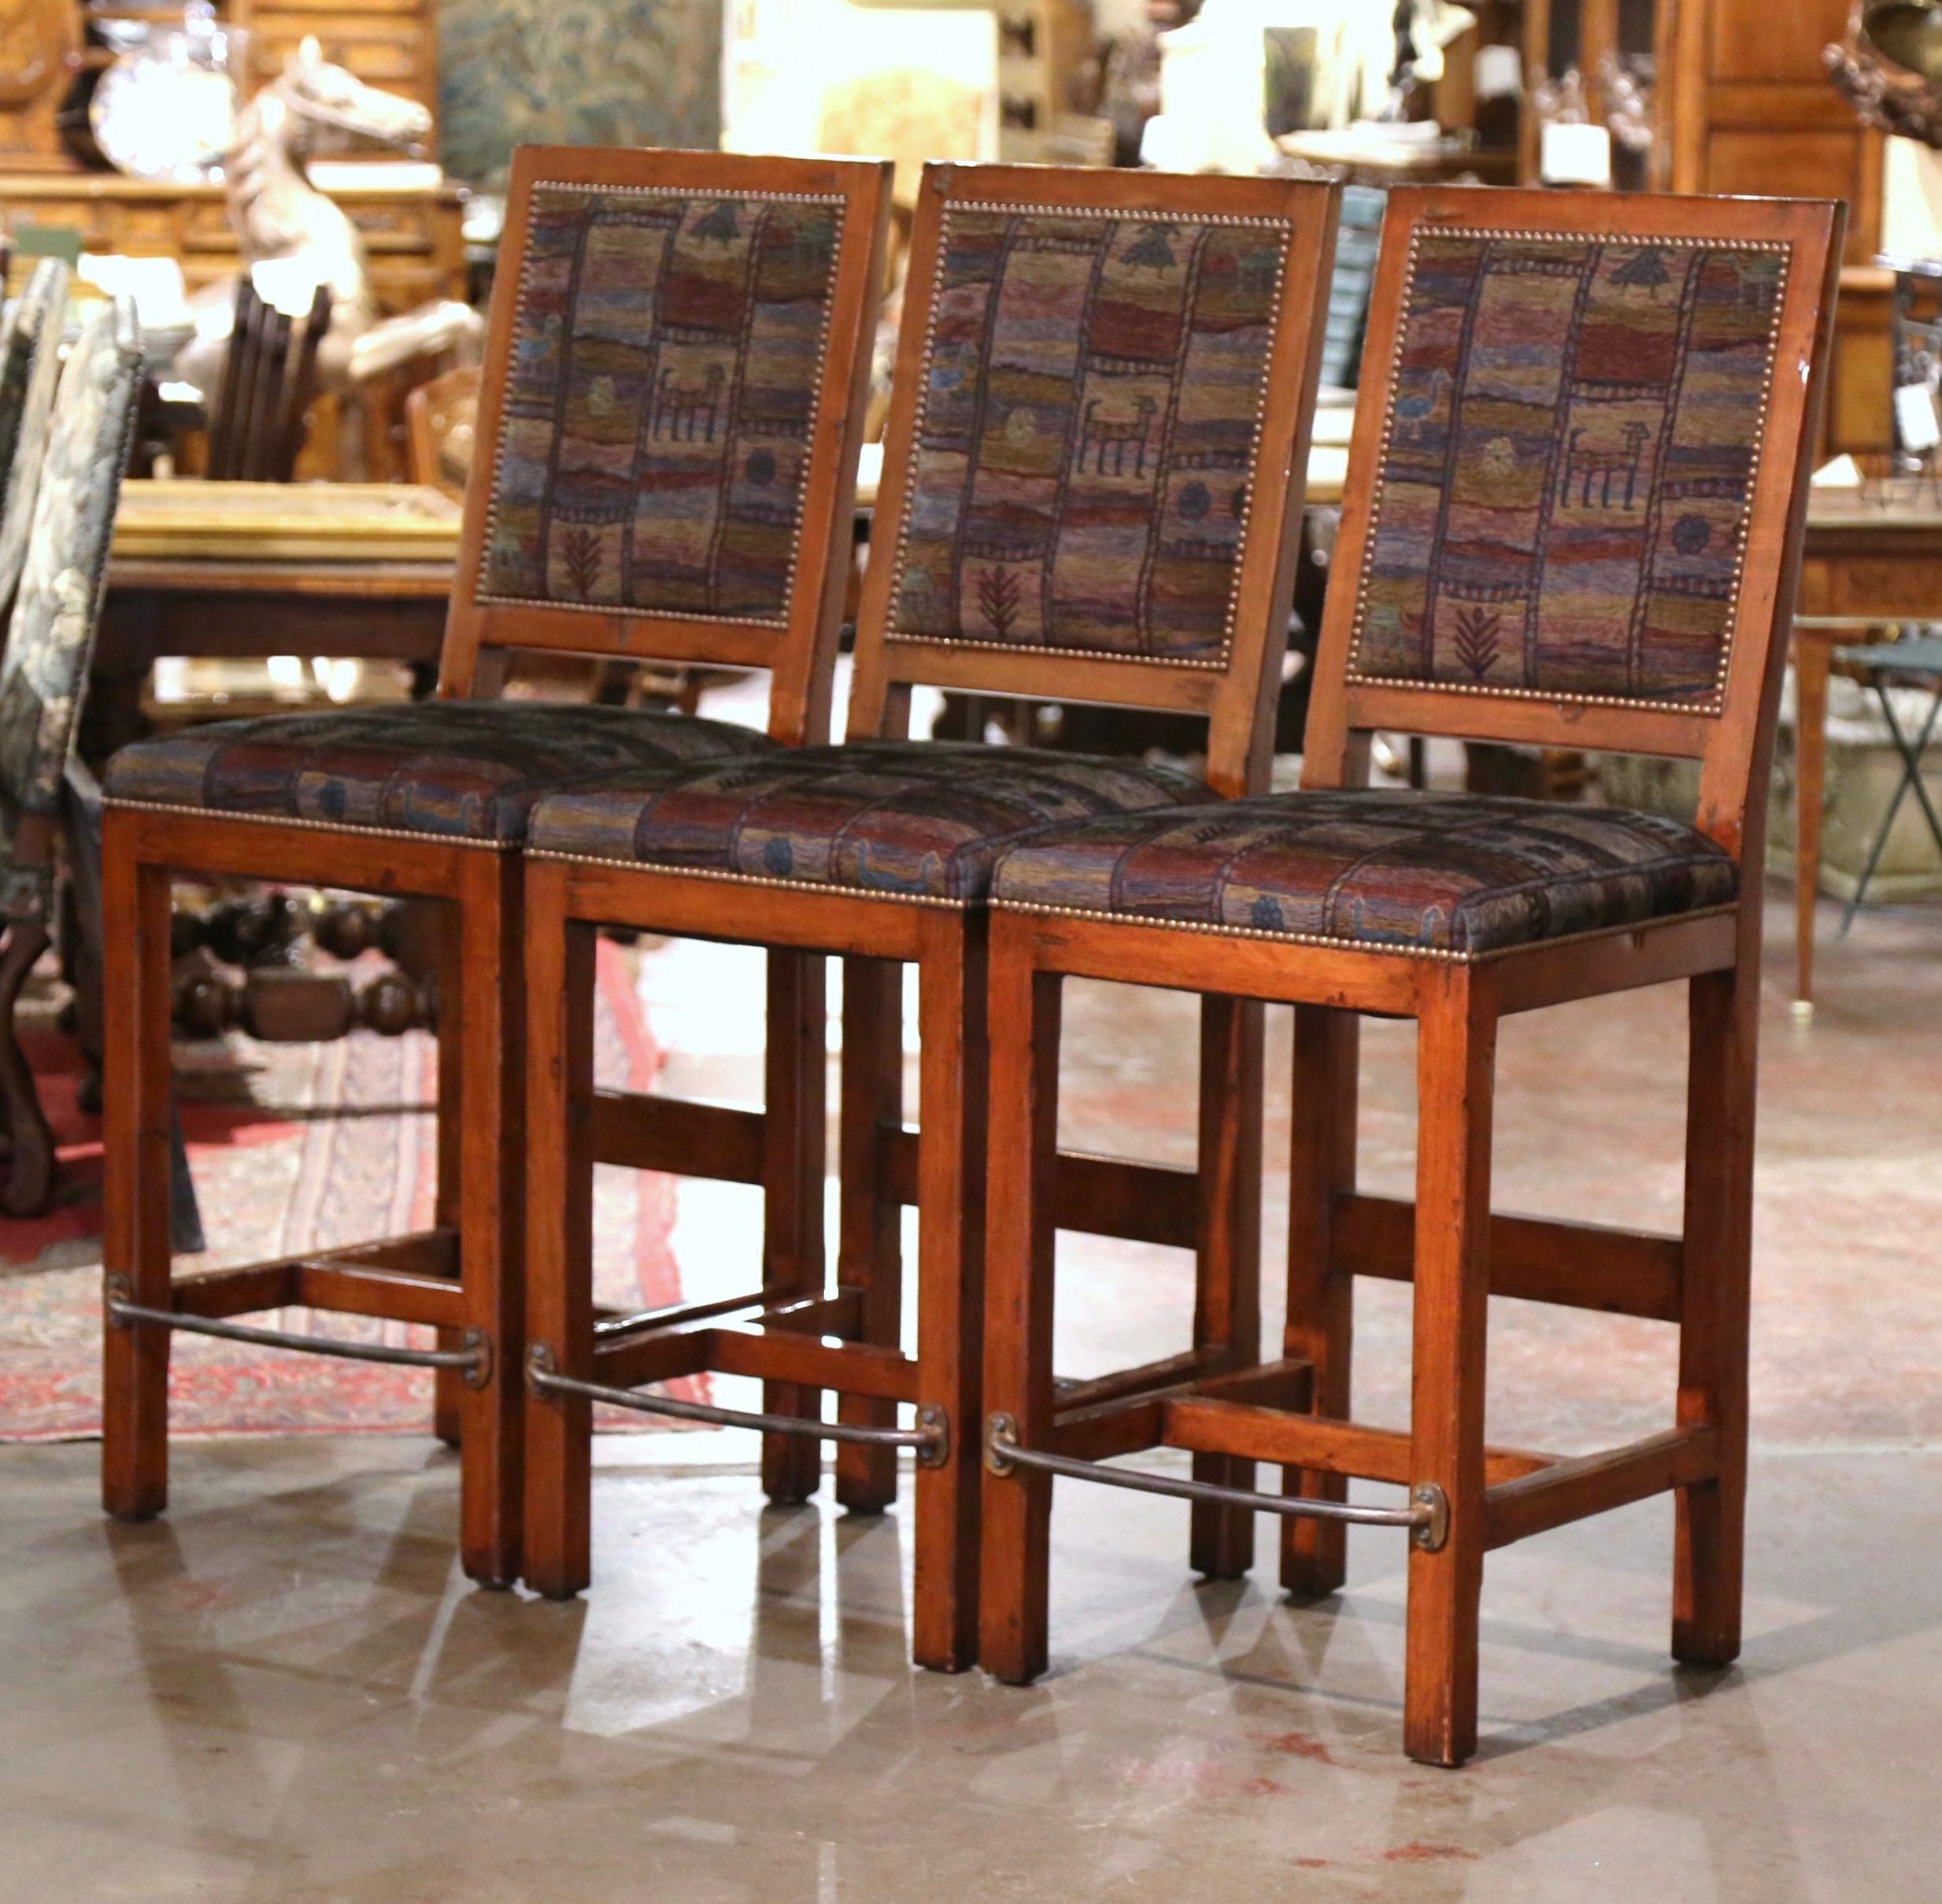 Add a Gothic look to your bar or kitchen counter with this elegant set of three vintage stools. Crafted circa 2000, the traditional barstools are the perfect height for a 42 to 45